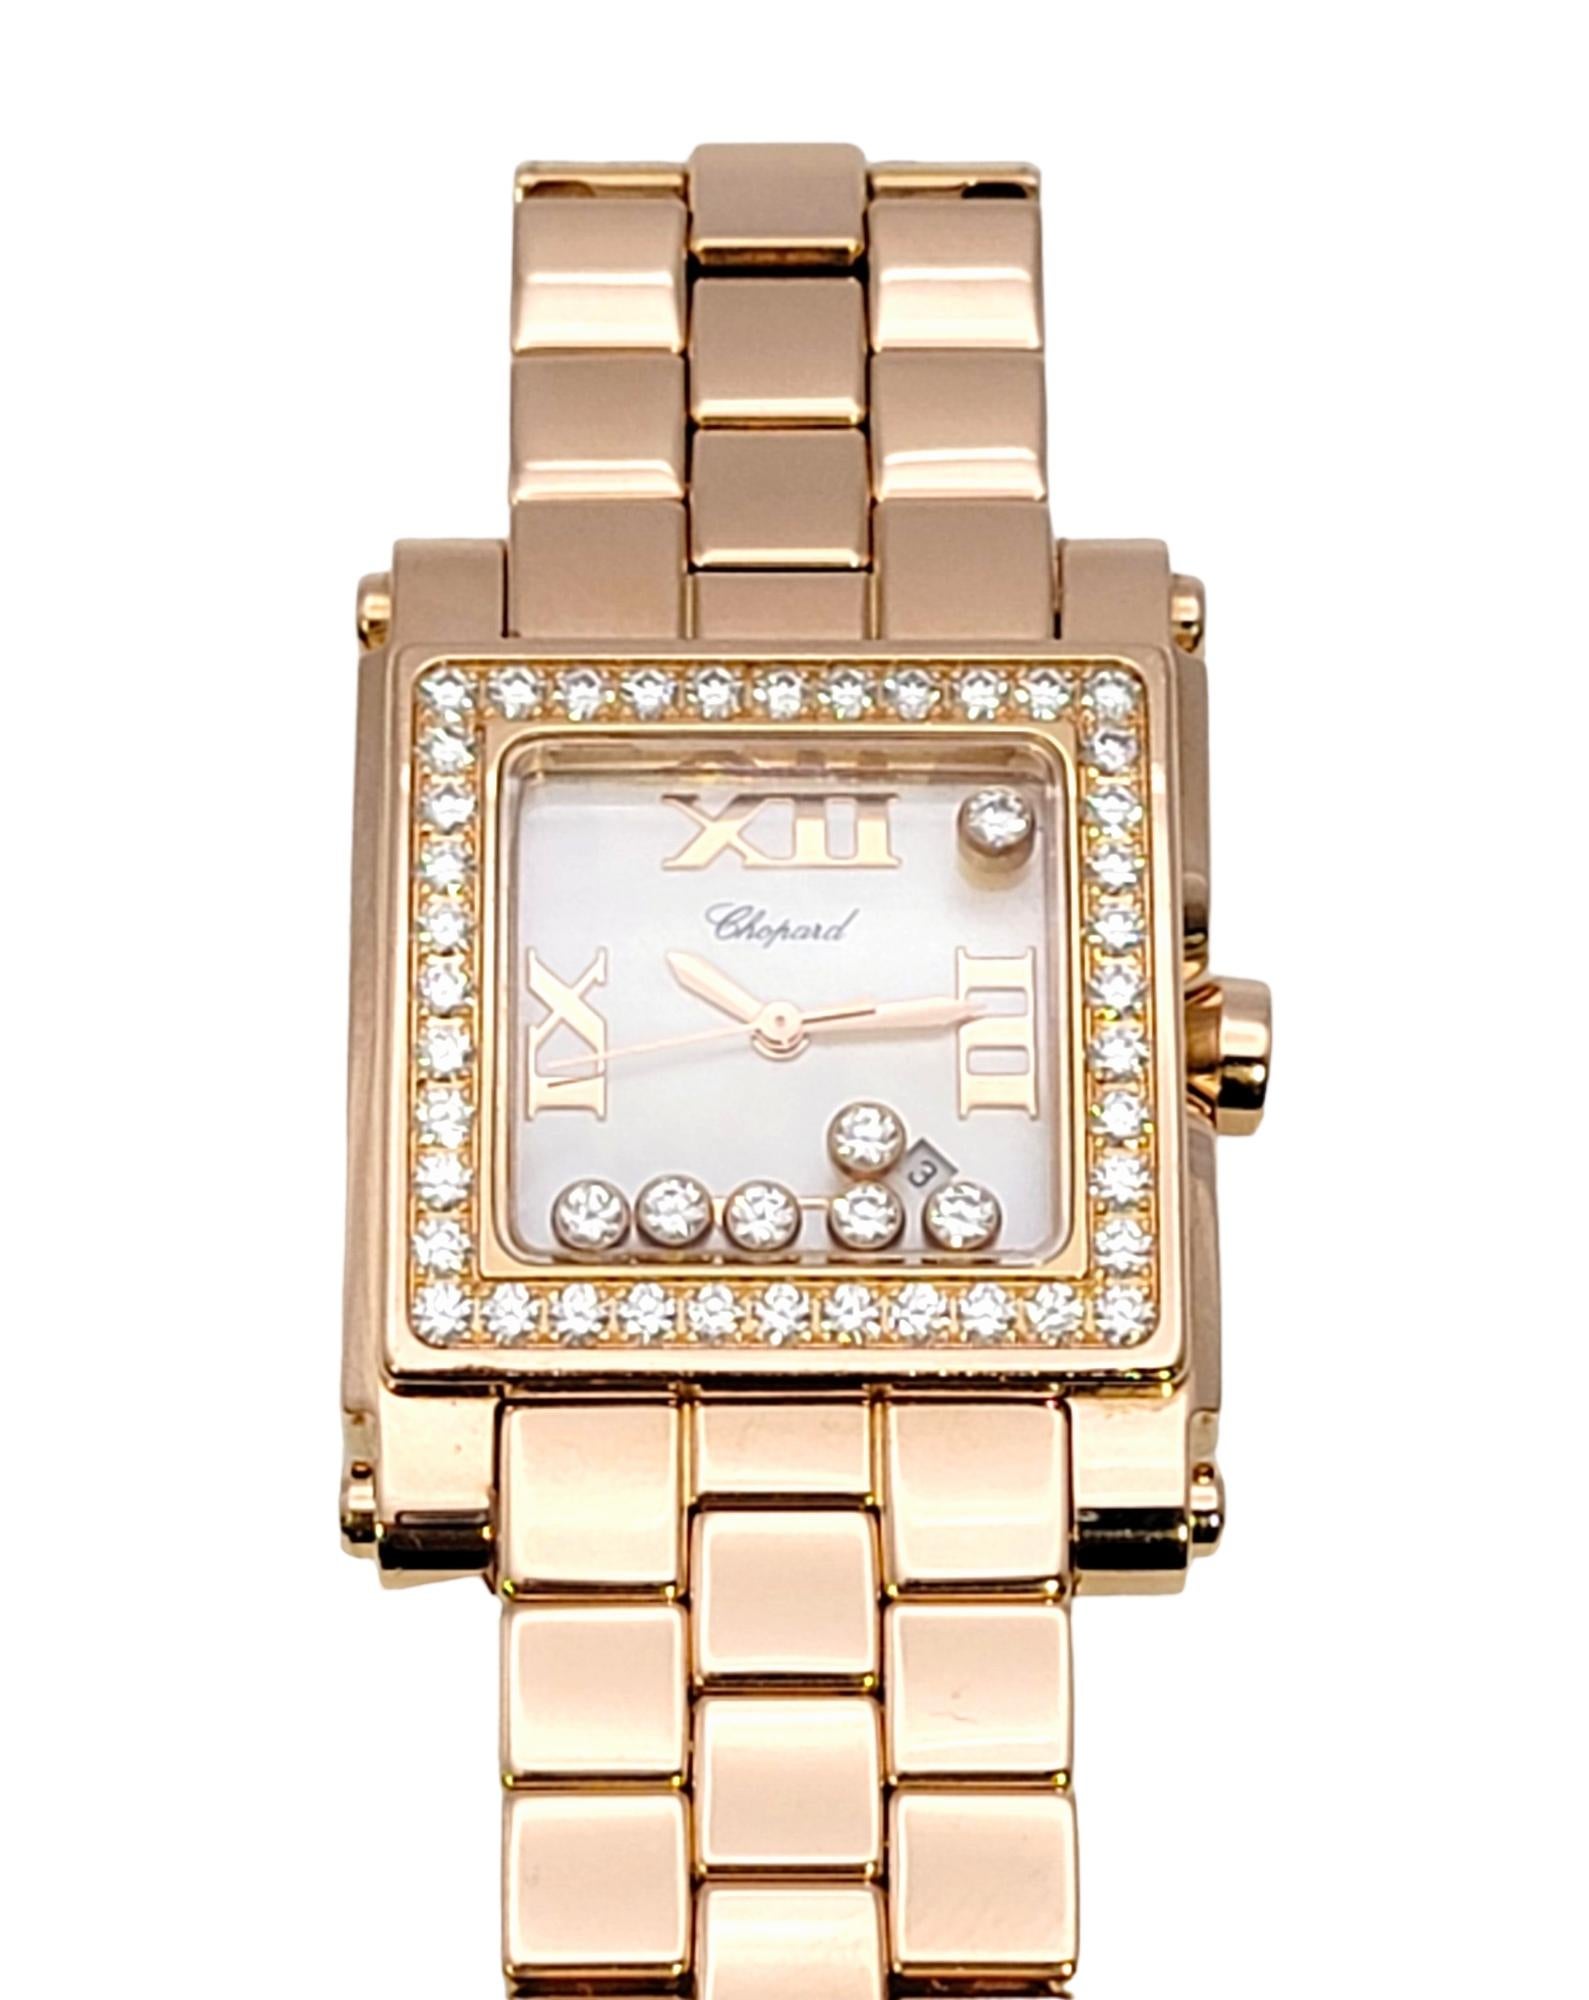 Luxurious ladies Happy Diamonds Sport wristwatch designed by Chopard. Chopard is an exceptional luxury jewelry and watches brand, founded in 1860 Switzerland. From their impressive red-carpet designs, to their world famous 